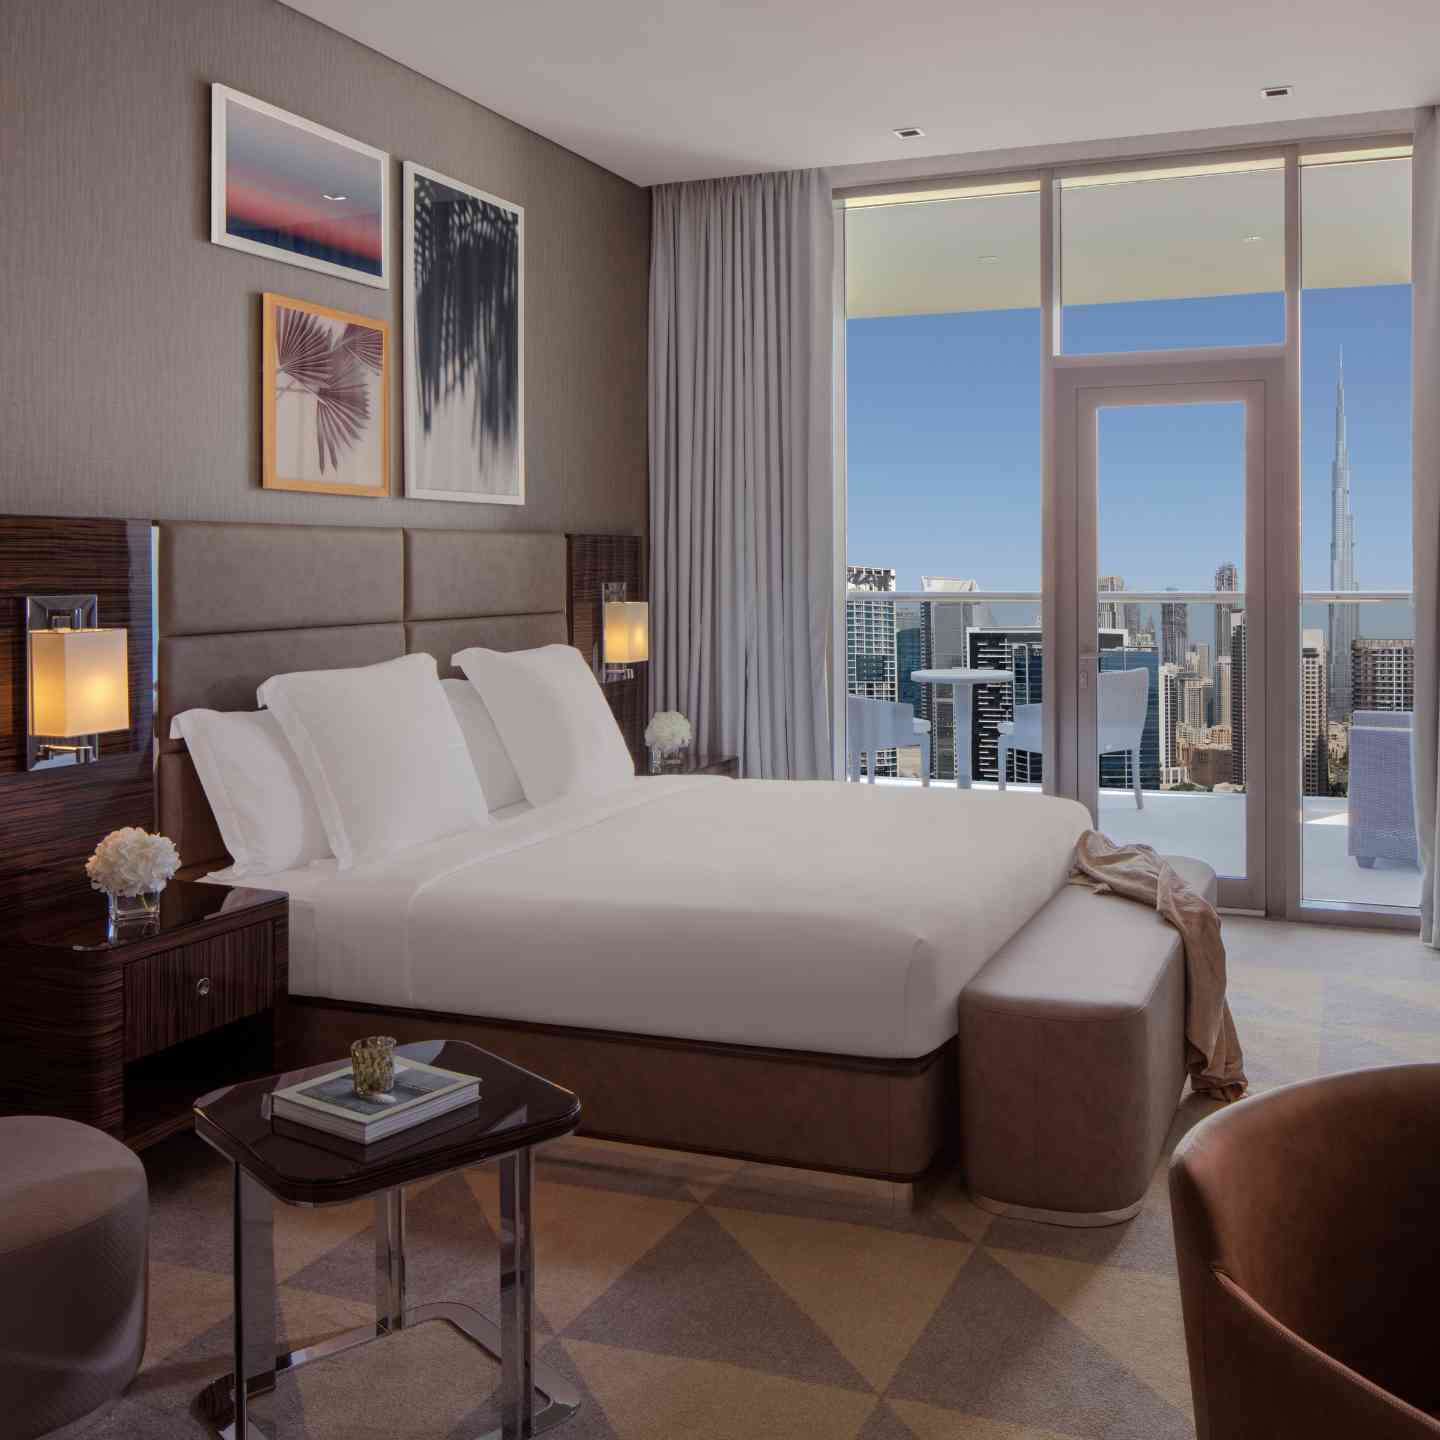 King bed with gray headboard, two lights on each side of bed, large floor to ceiling windows with view of Dubai cityscape and the Burj Khalifa